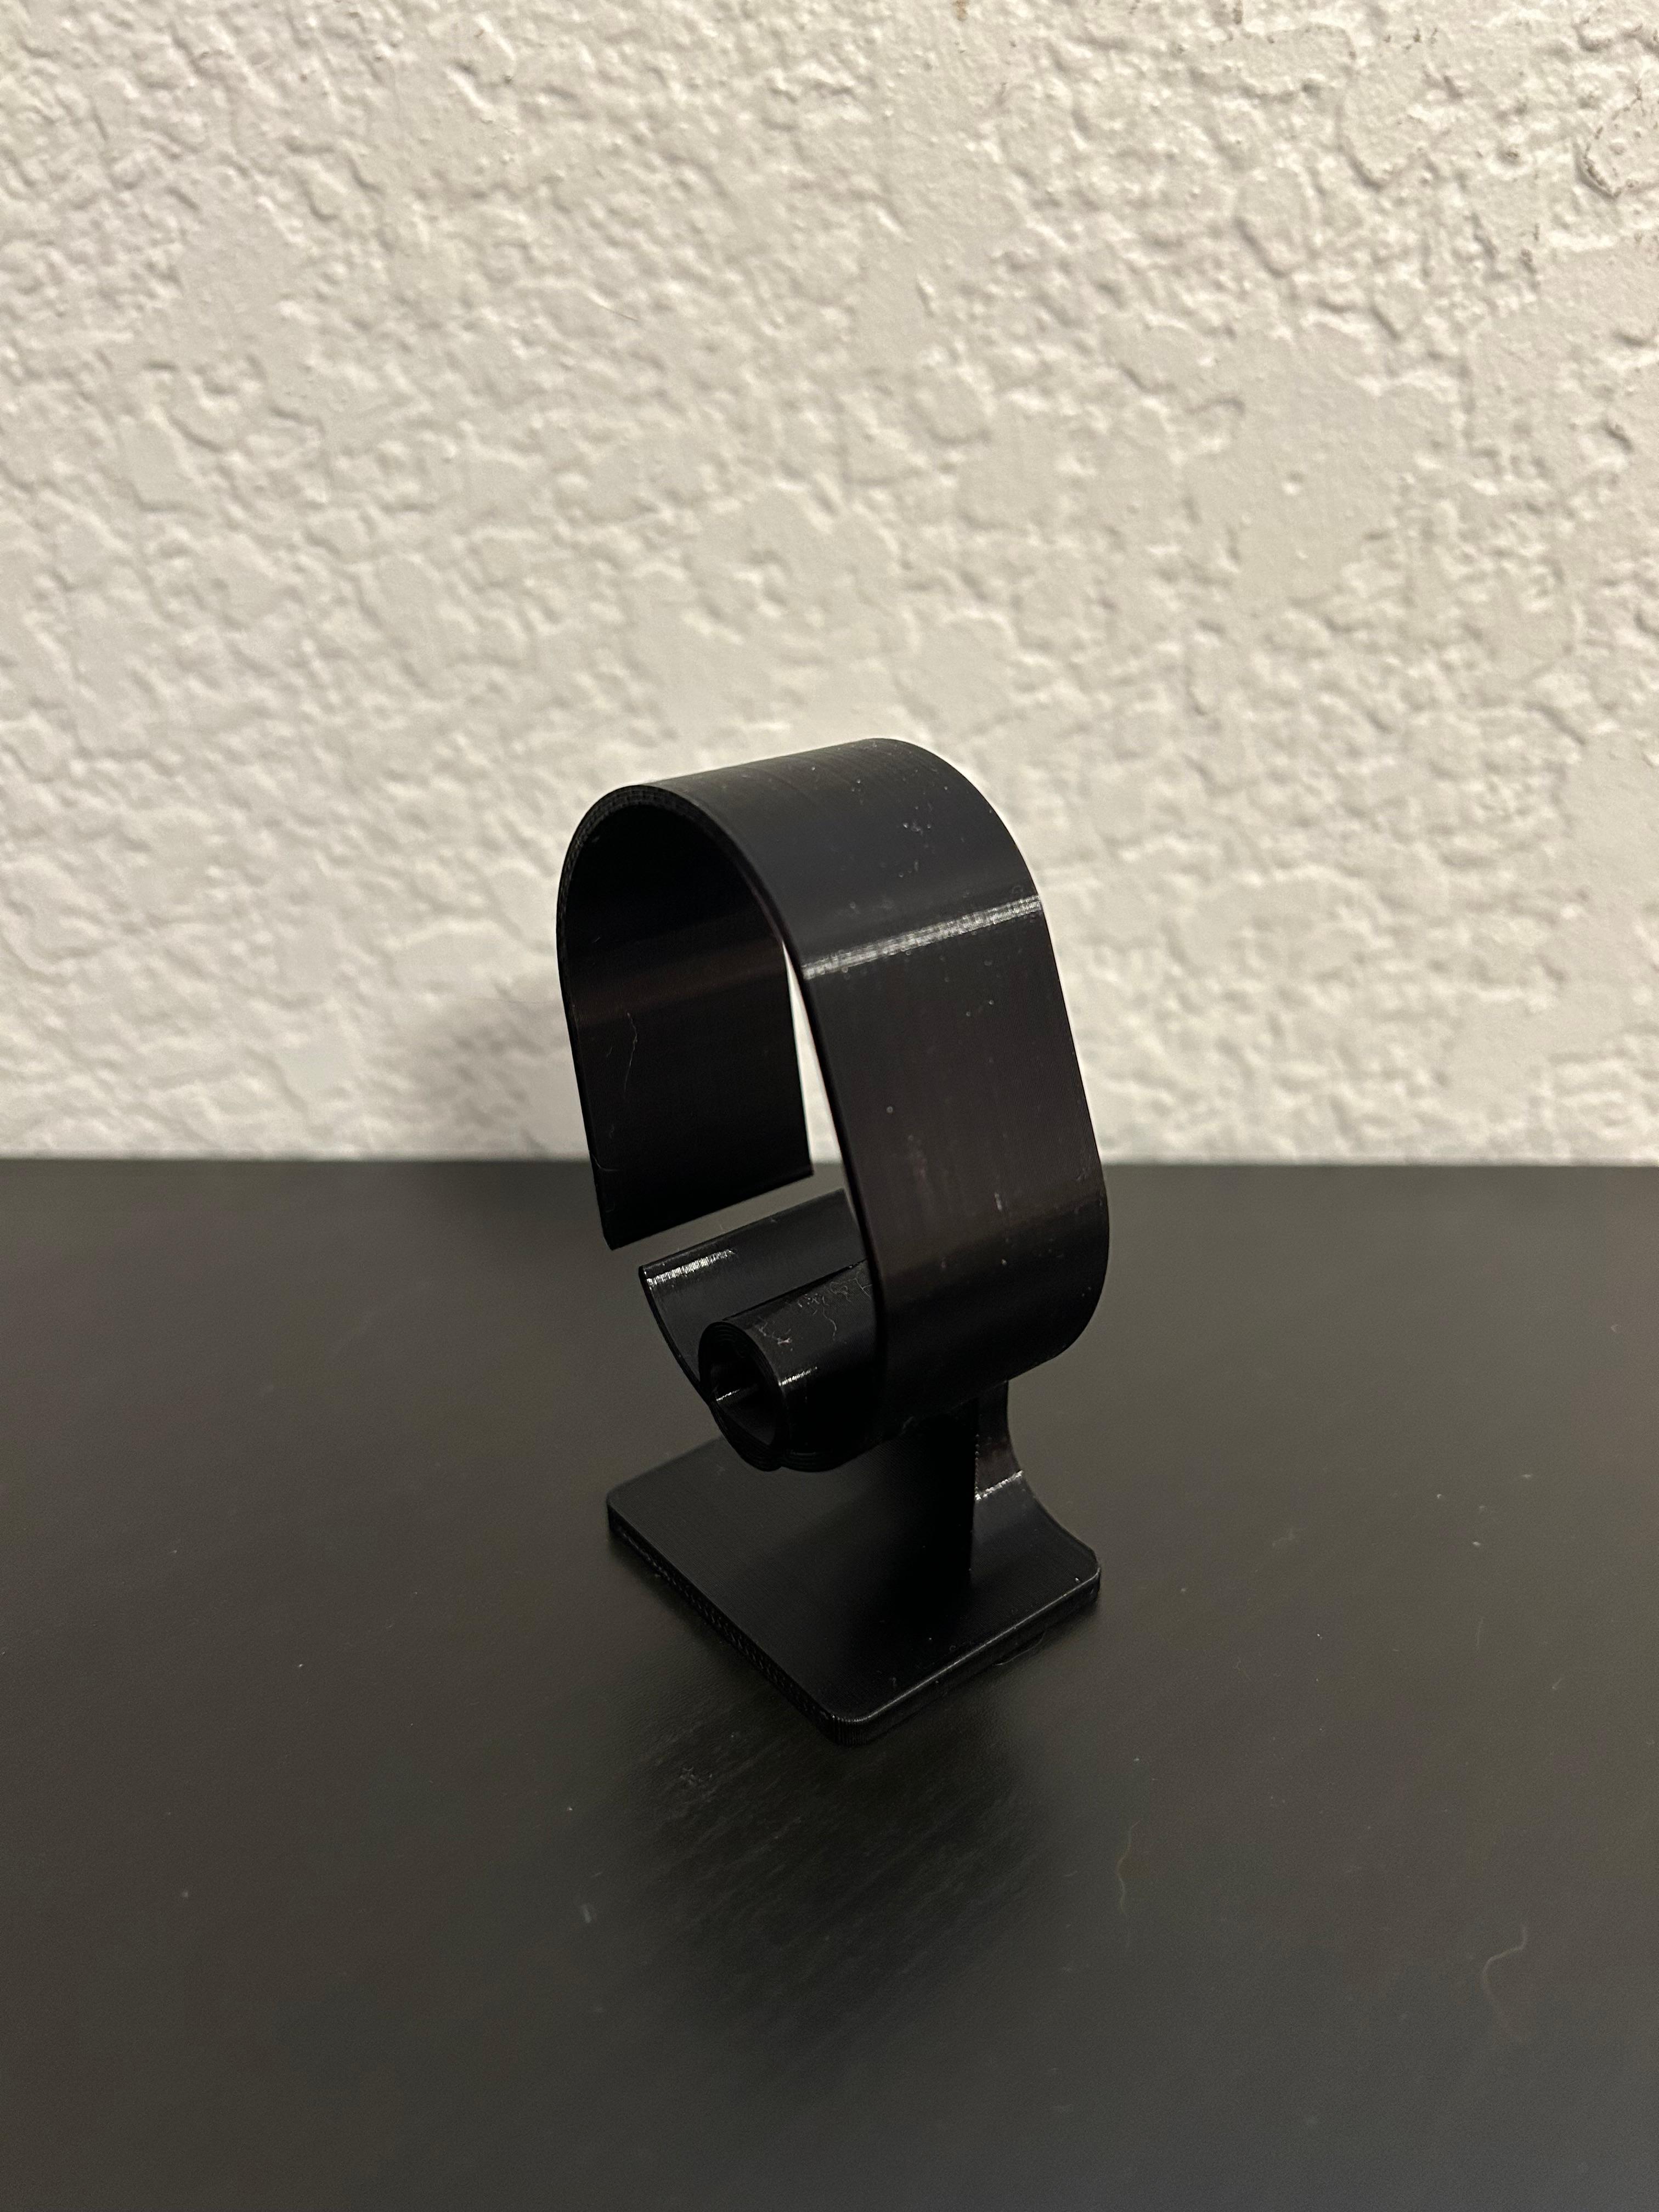 Watch Stand 3d model